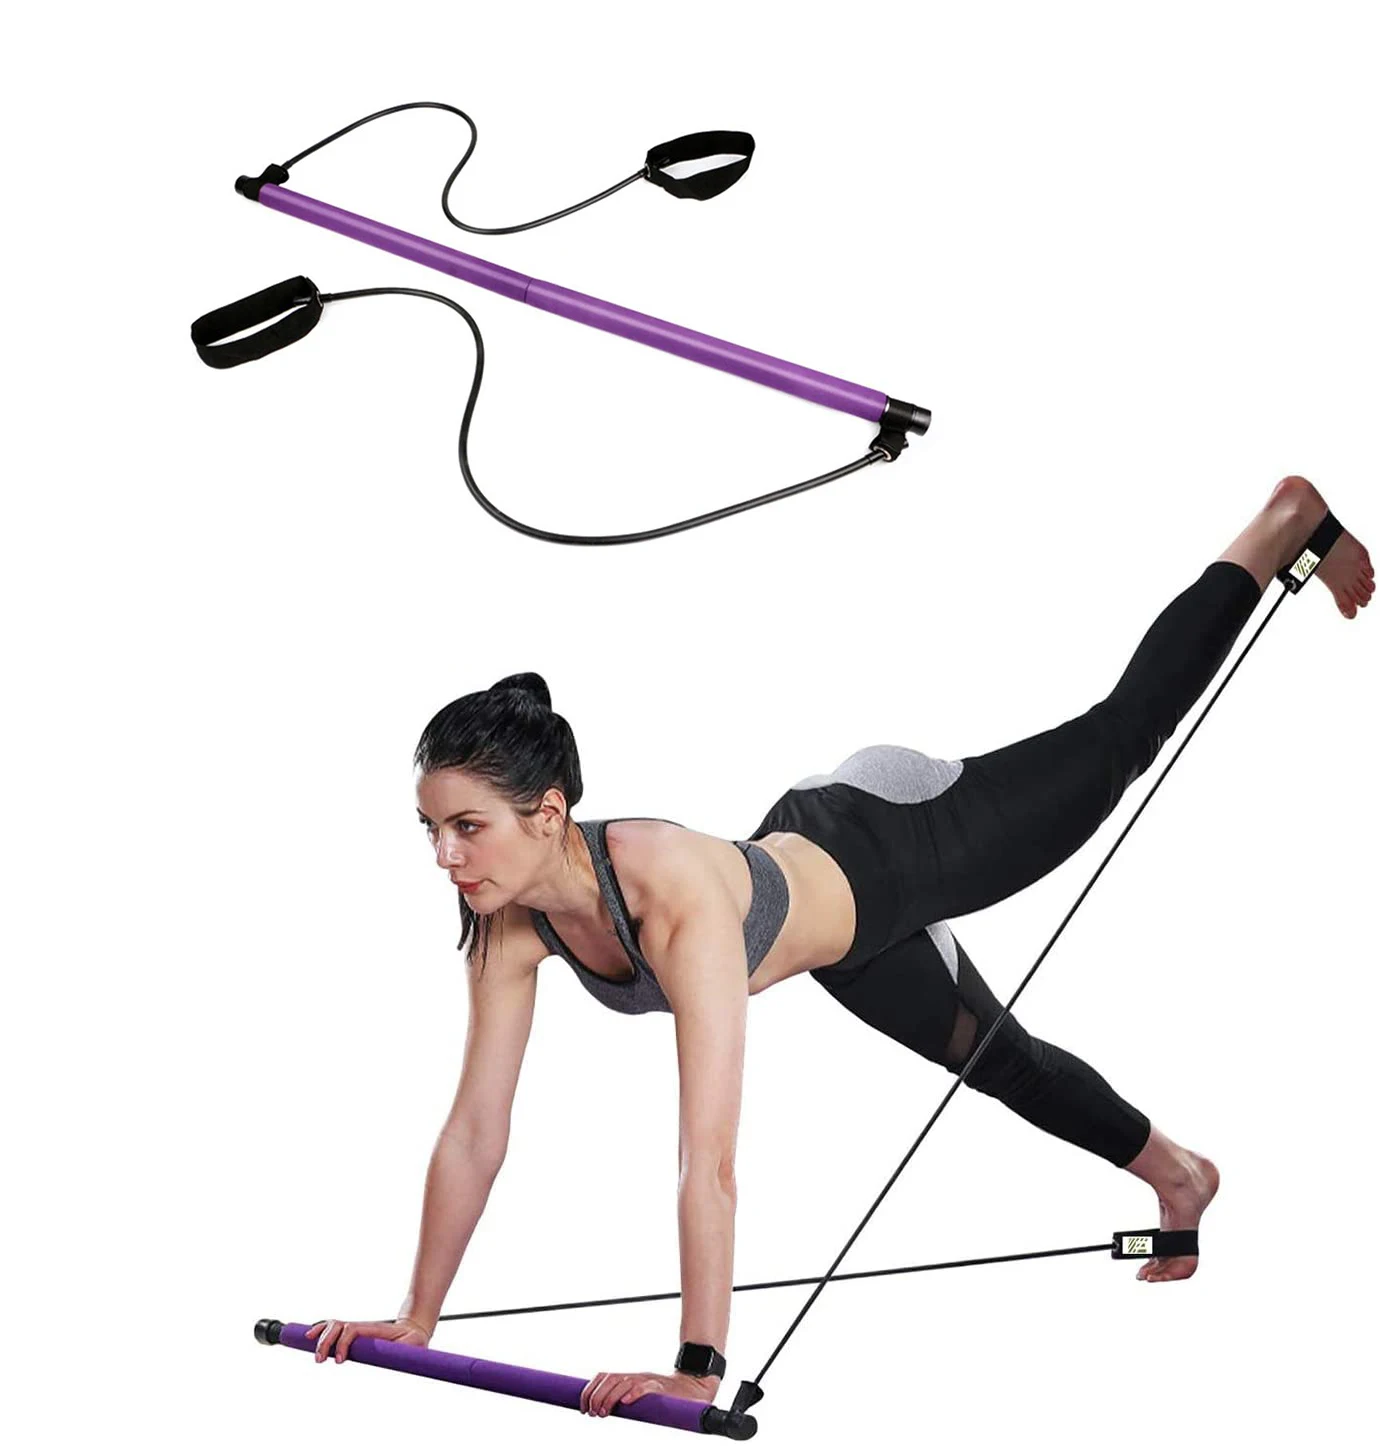 

Yoga Pilates Bar with Resistance Bands Portable Muscle Toning & Body Shaping Exercise Stick Kit for Home Gym Workout, Purple,pink